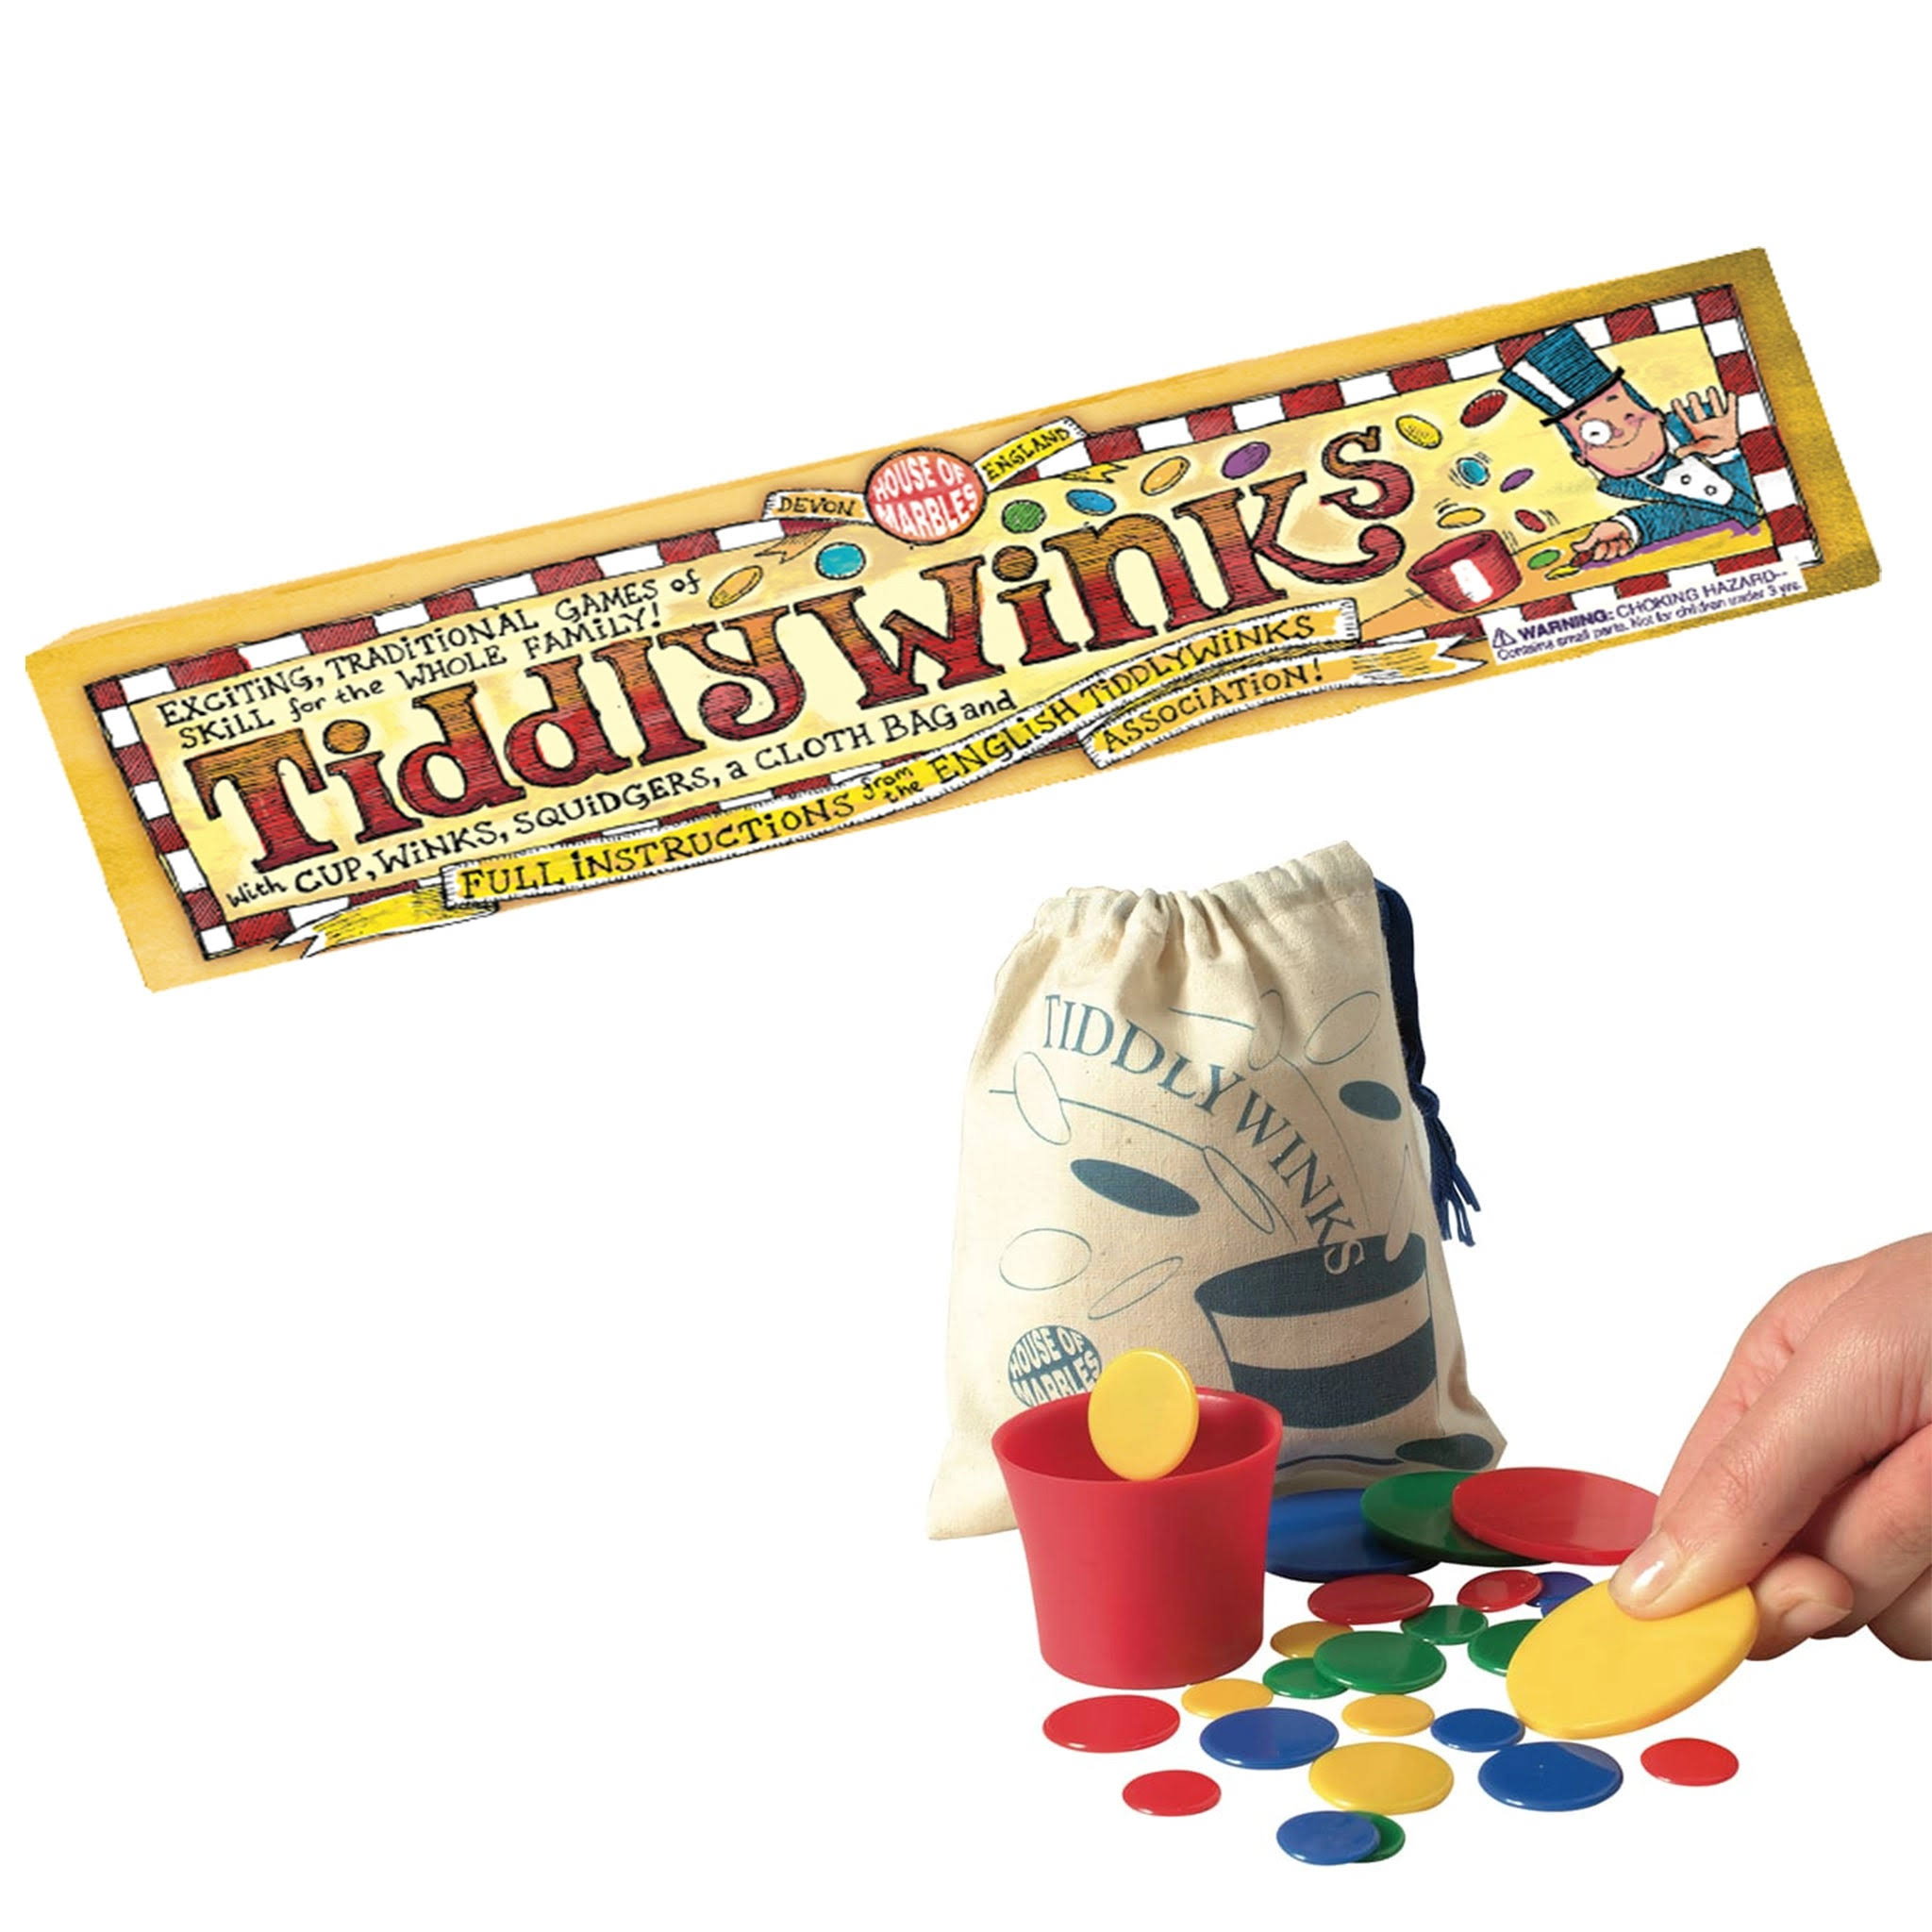 House of Marbles Tiddlywinks Toy Set